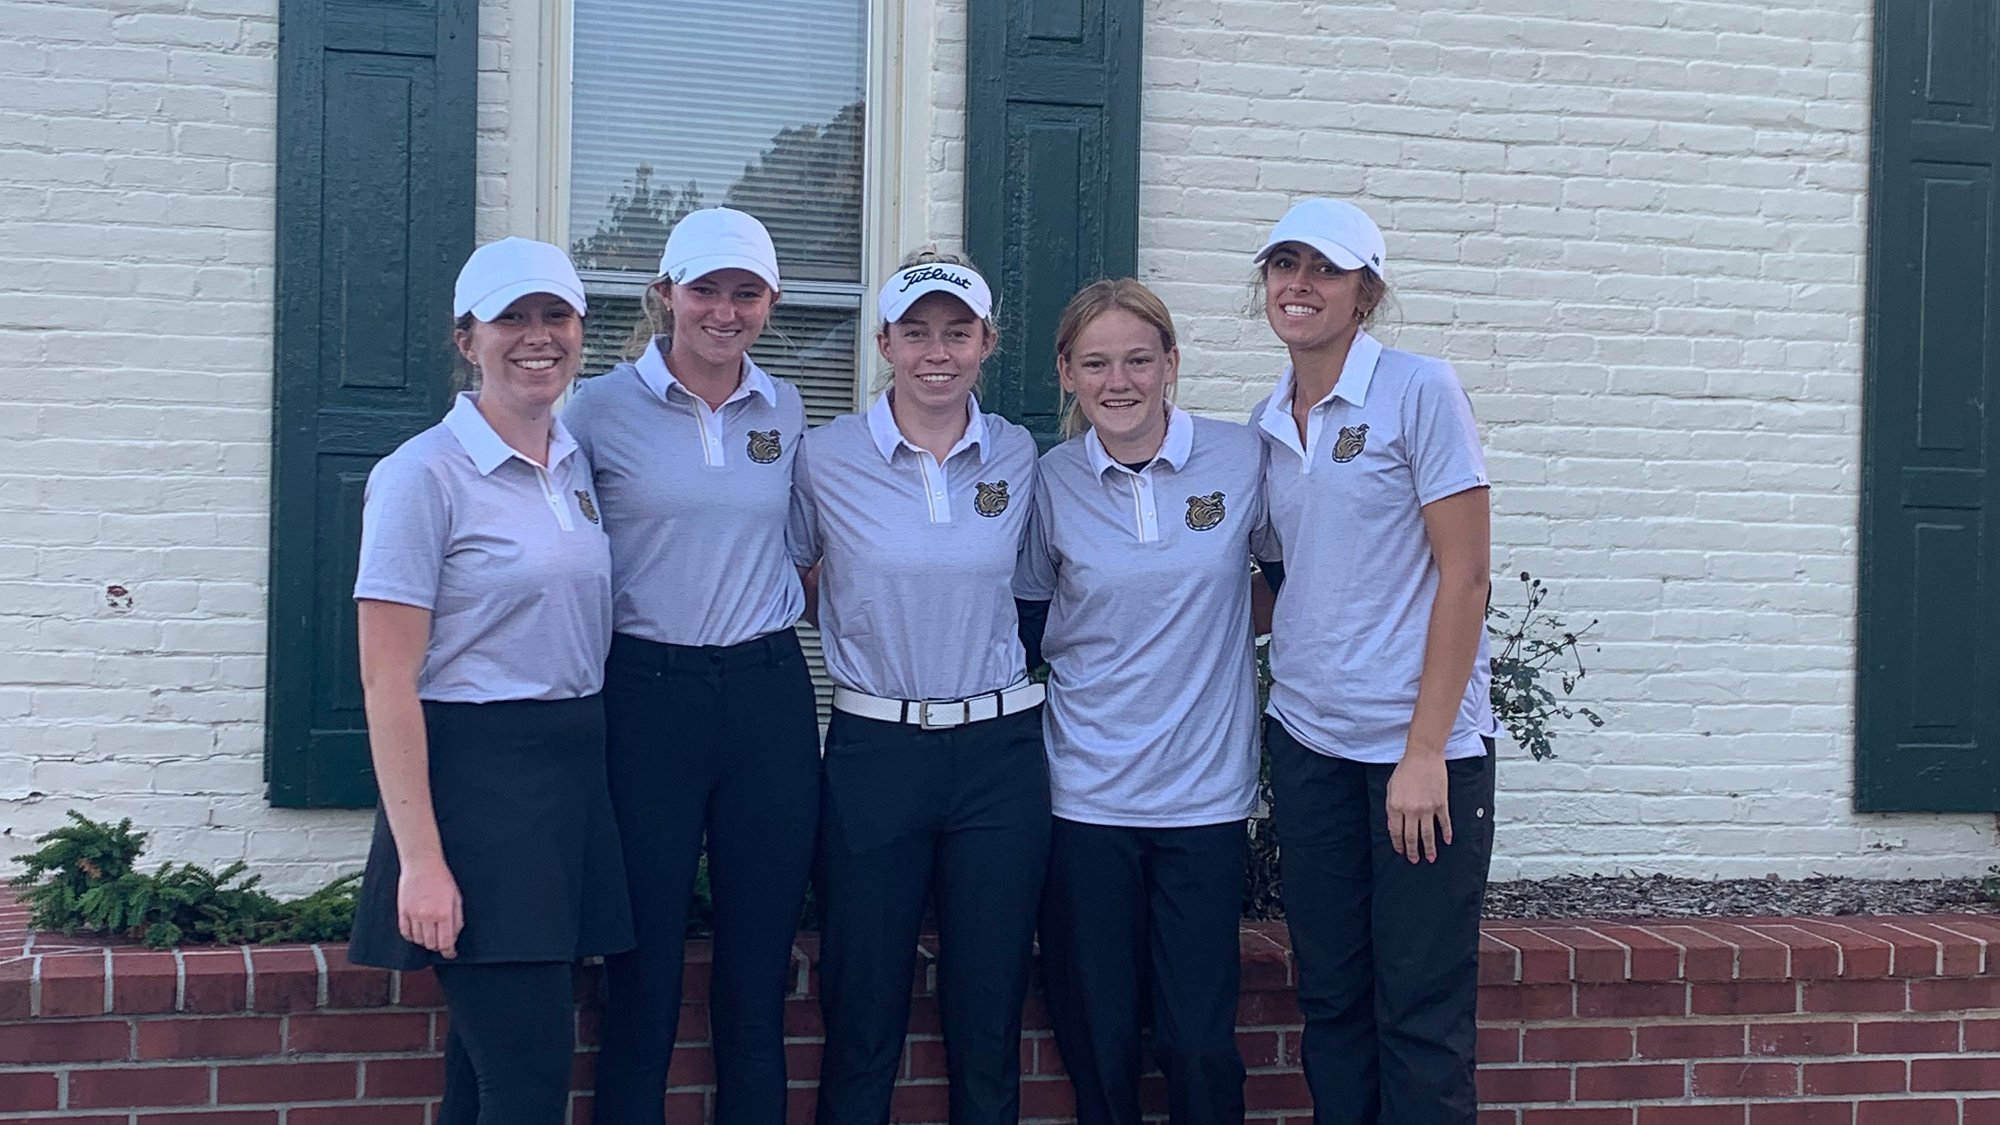 Neal and the Bulldogs finishes T3 at Bucknell Invitational